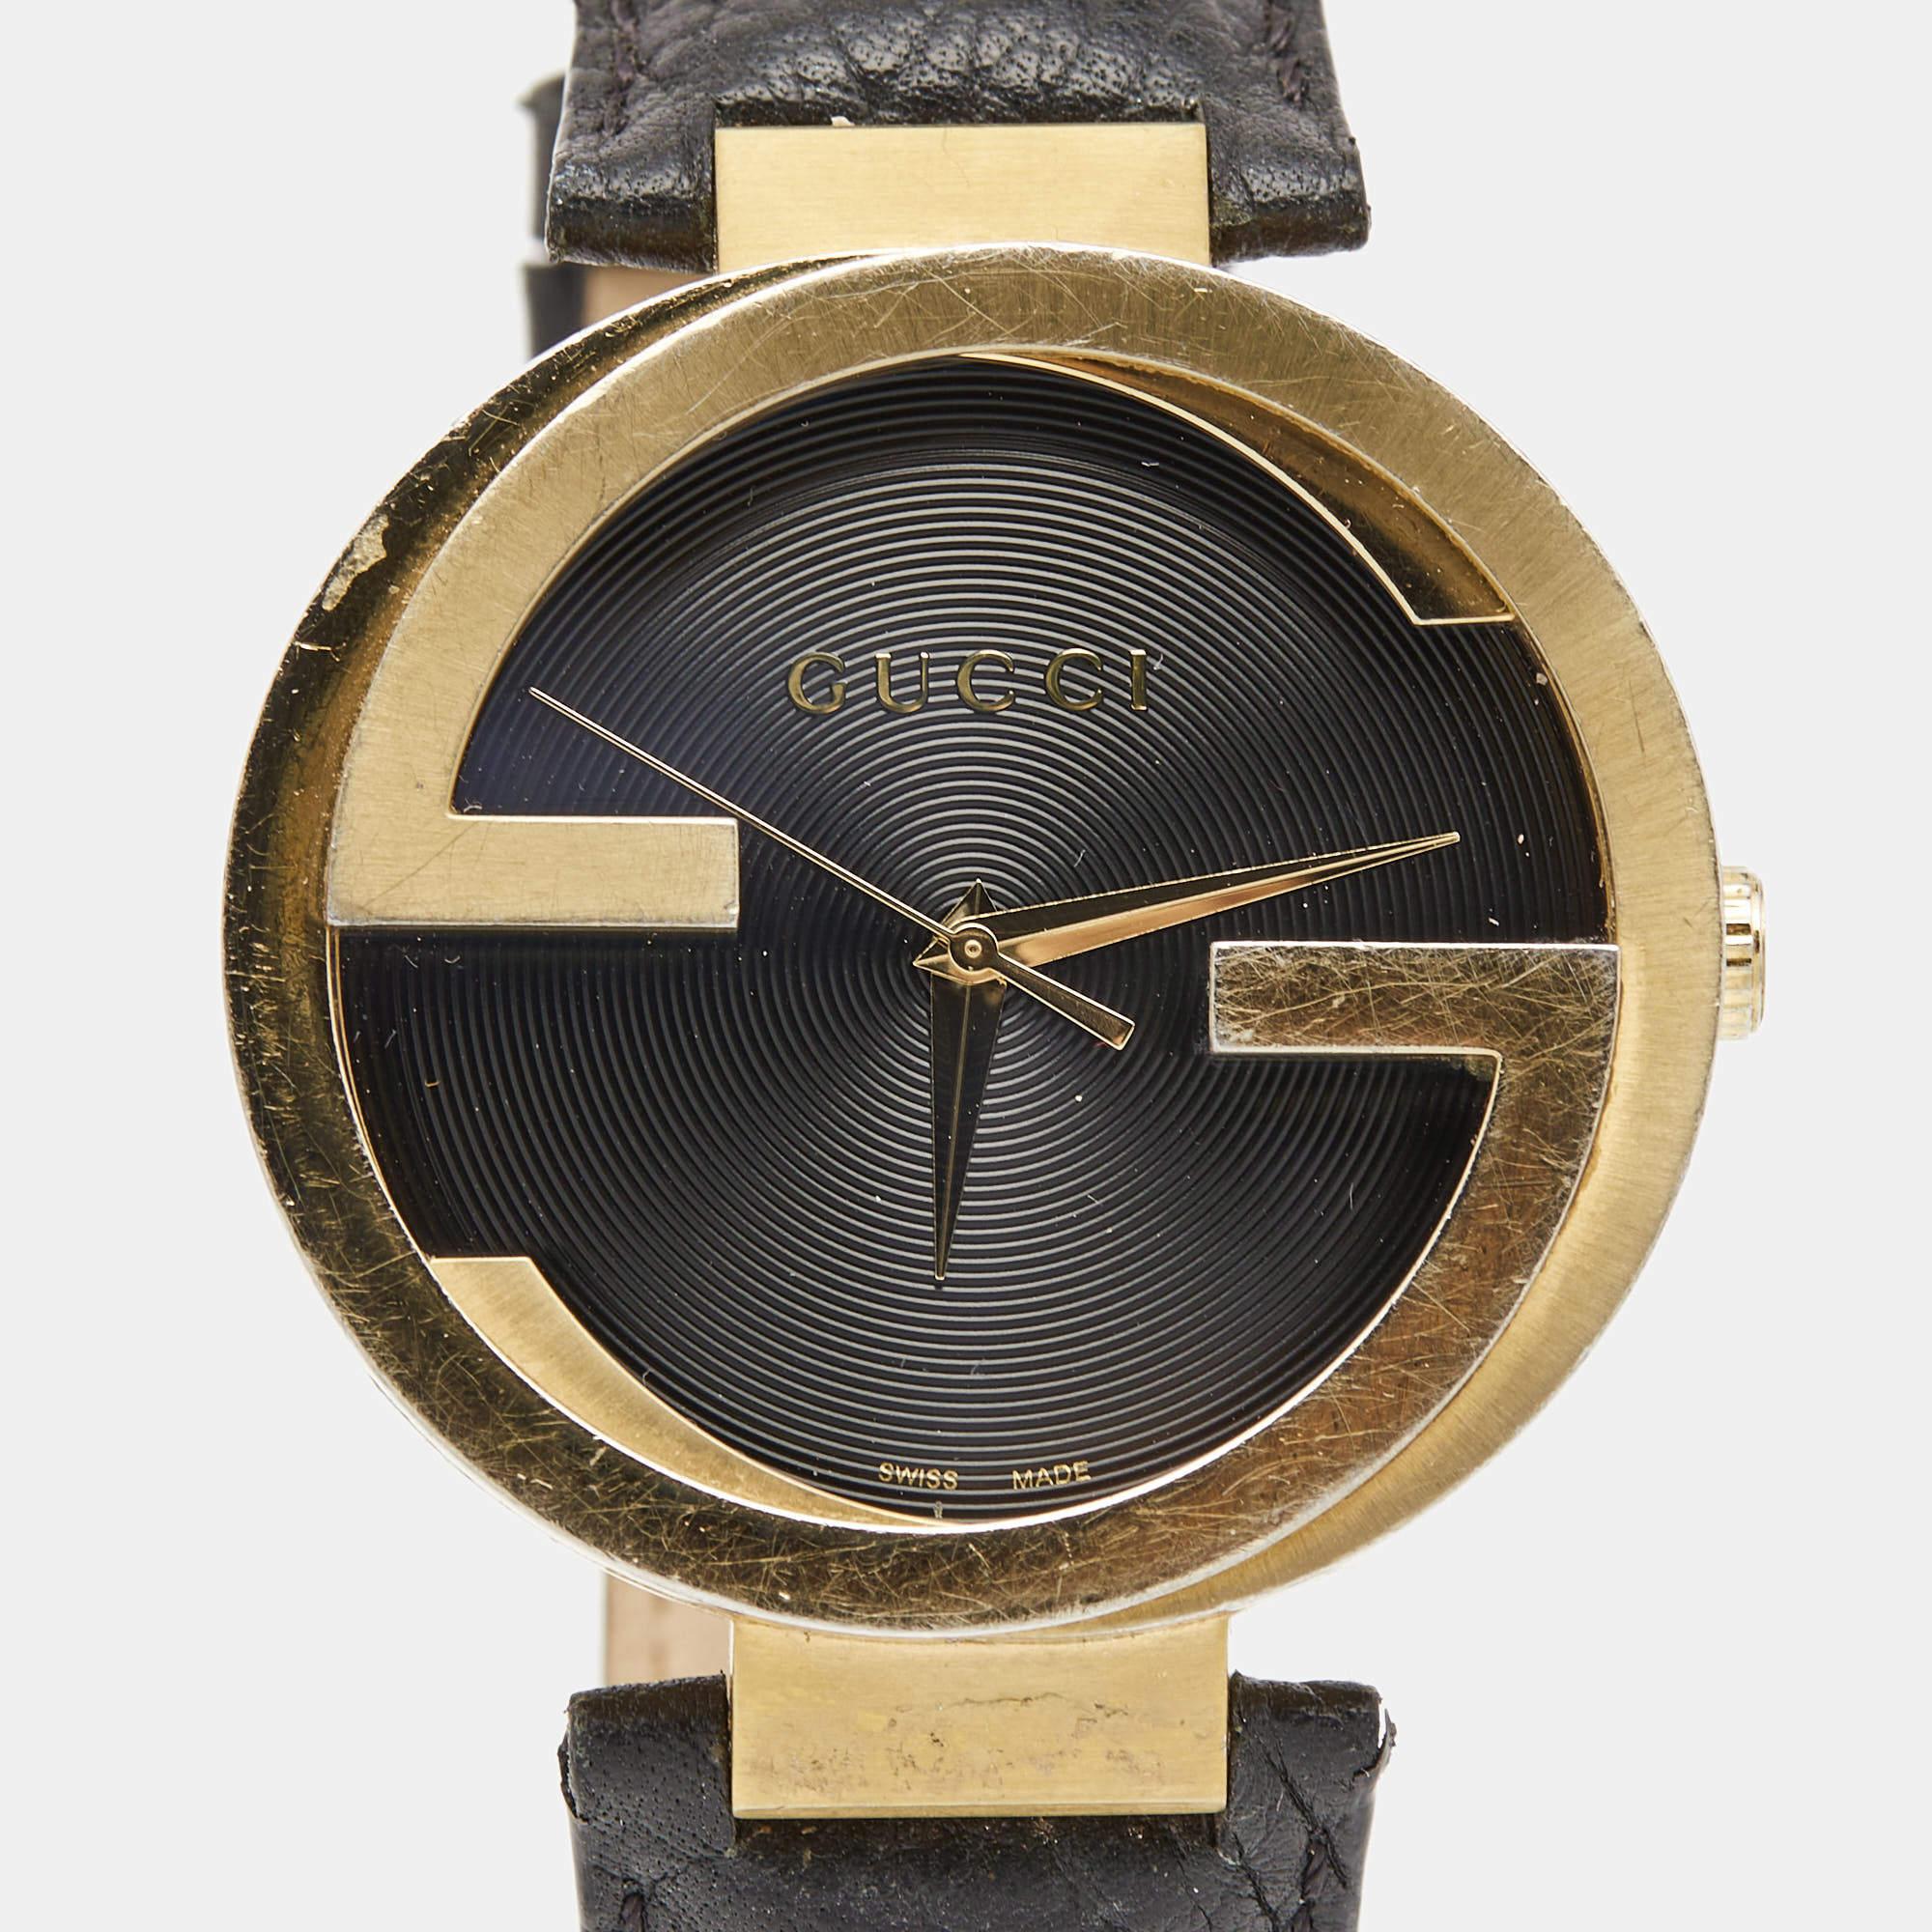 Let this Latin Grammy's XL Special Edition watch by Gucci accompany you with ease and luxurious style. Beautifully crafted using the best quality materials, this authentic branded watch is built to be a standout accessory for your wrist.

